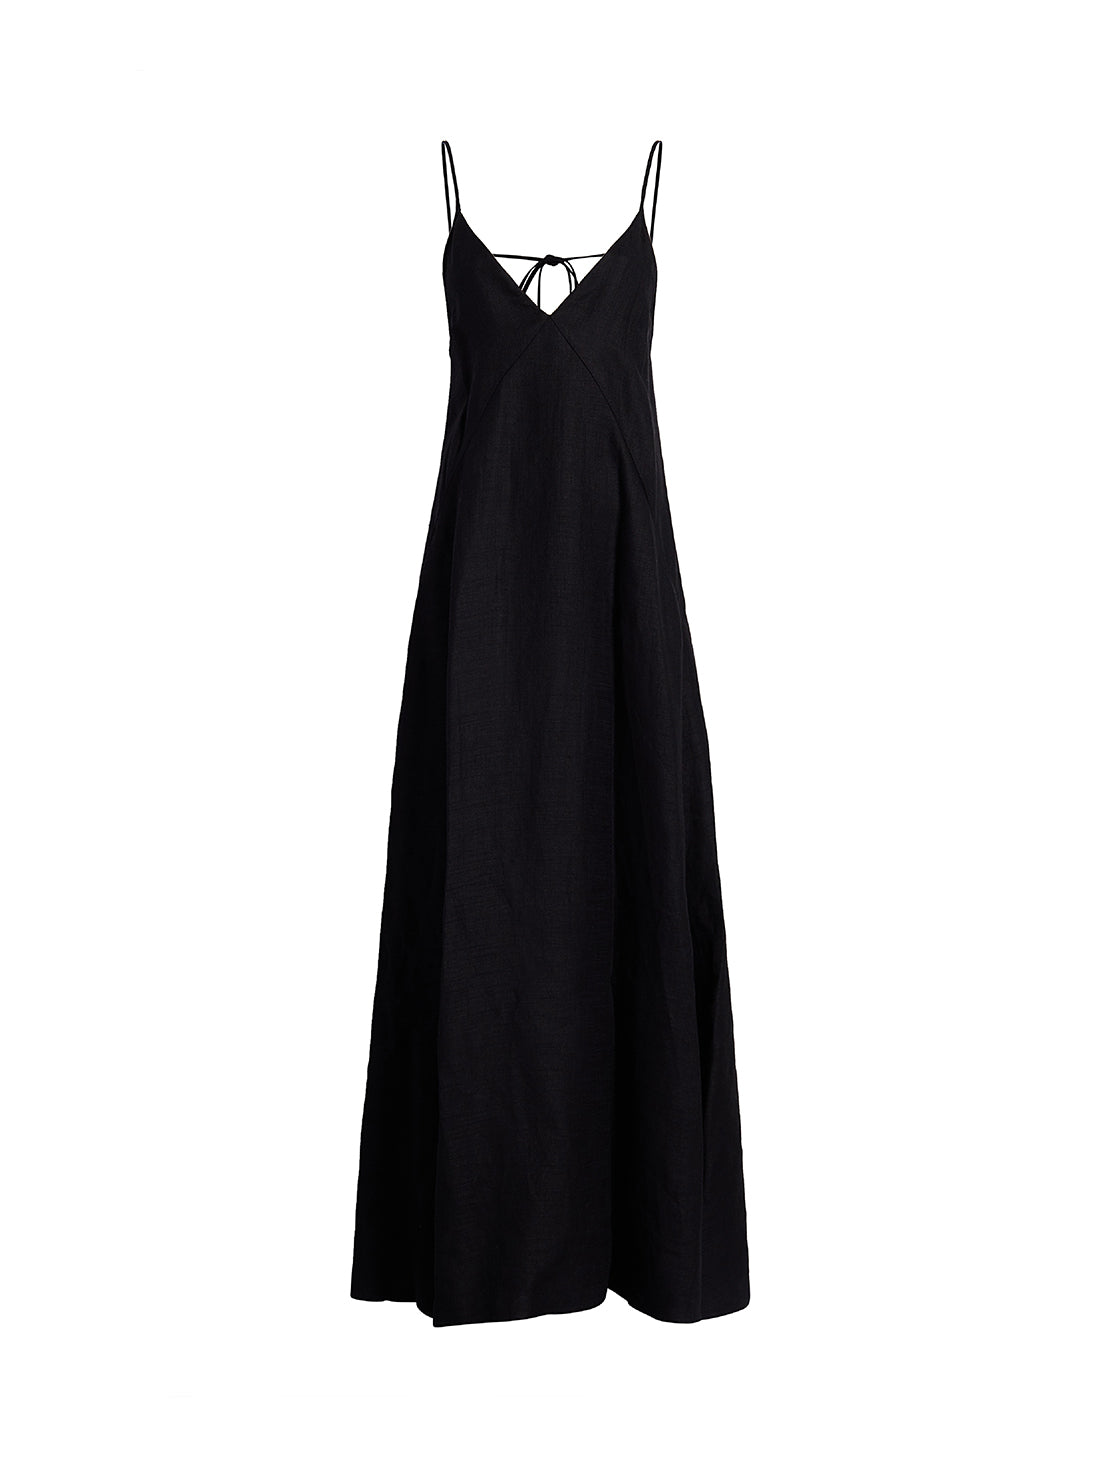 Slip Dress | Another Tomorrow - Conscious Clothing